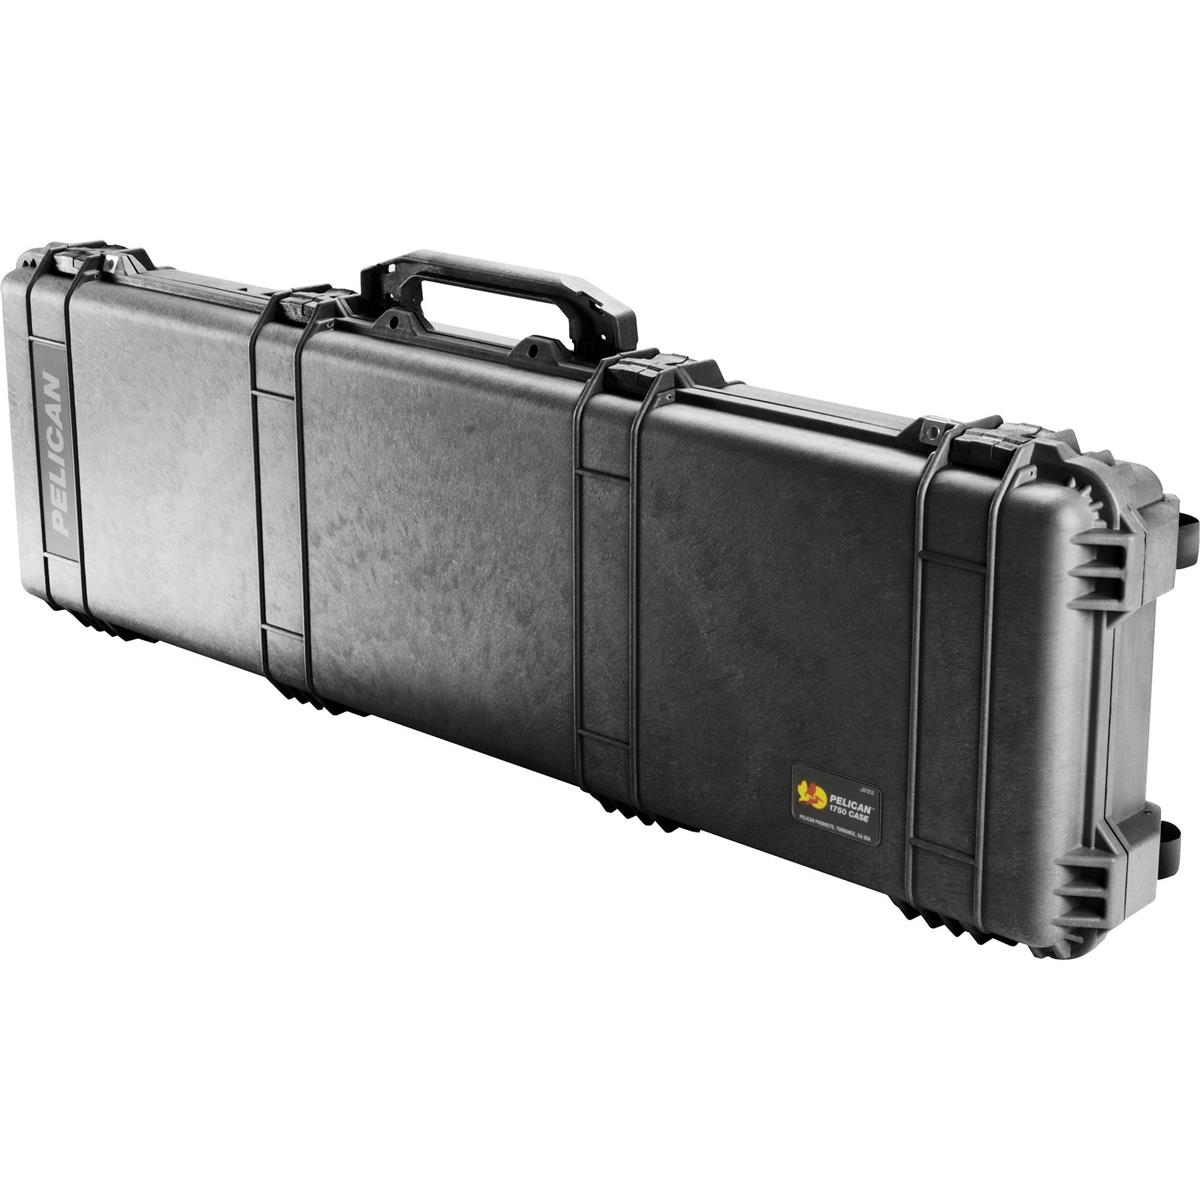 Image of Pelican 1750NF Travel Vault Wheeled Weapons Case without Foam Insert